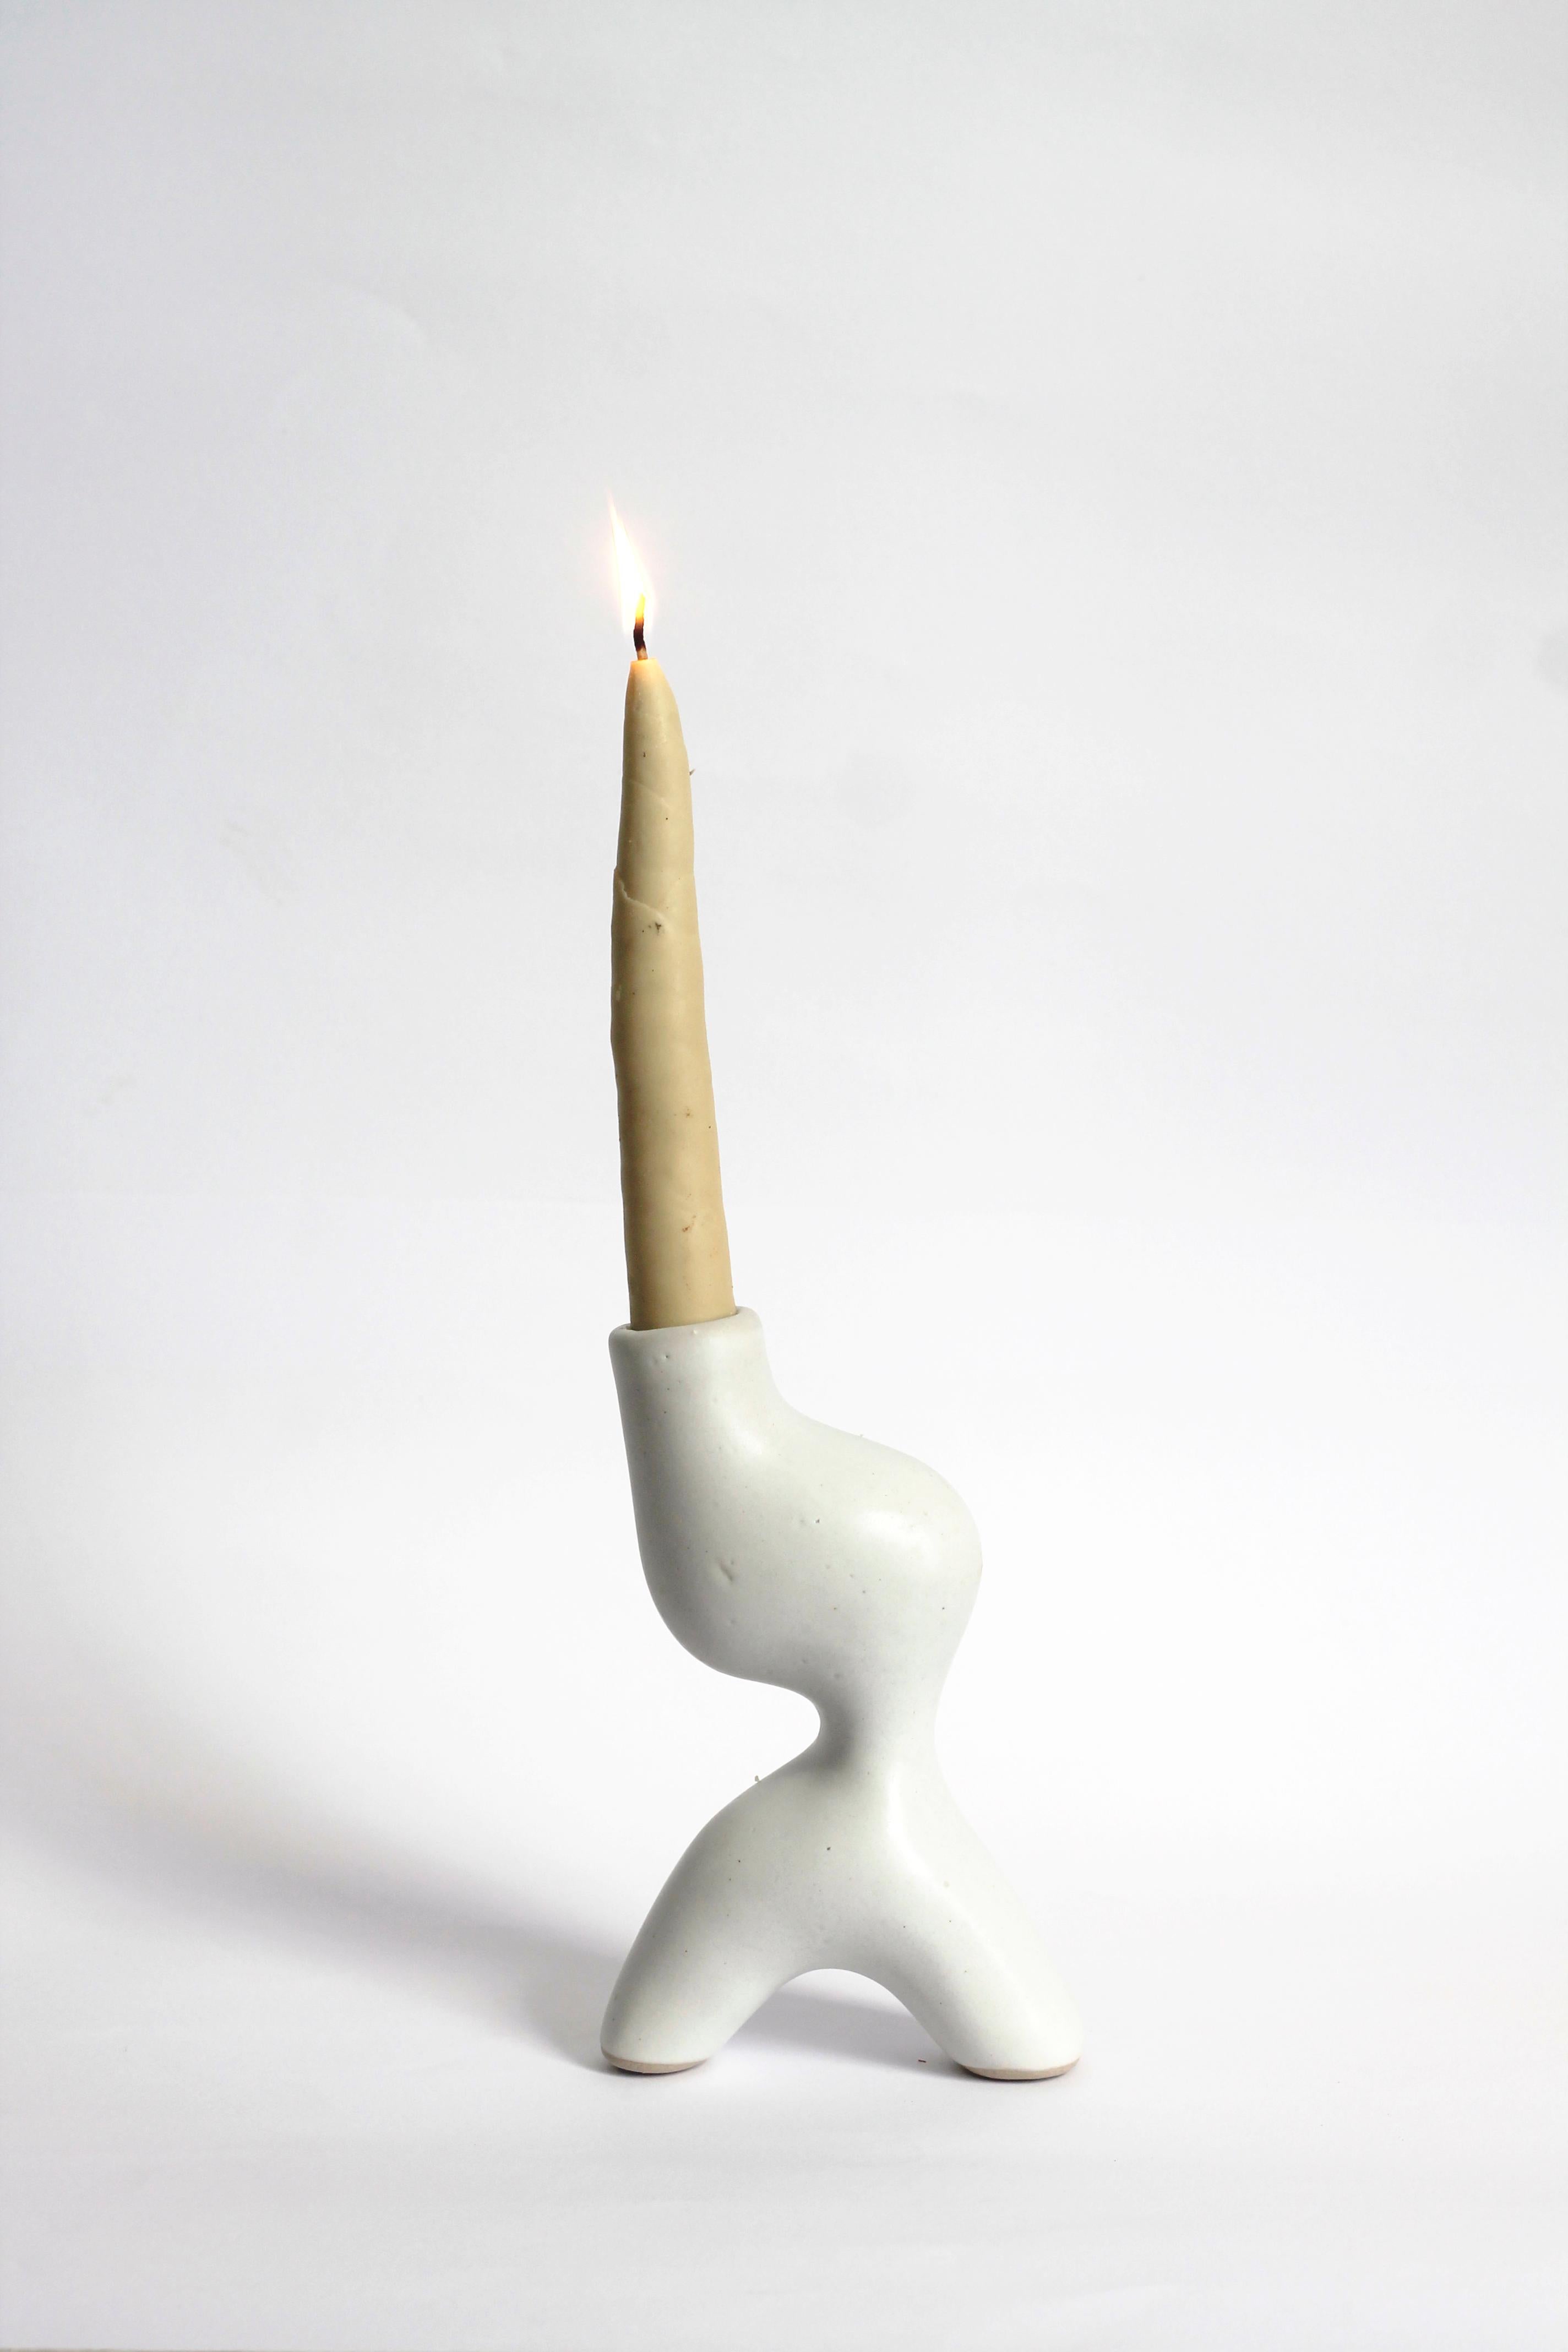 Candle Holder Candelabro by Camila Apaez.
One of a Kind.
Materials: Stoneware.
Dimensions: 11 x 7 x 16 H cm.

Ila Ceramica emerged from a process of inner inquiry where ceramics became a space for presence, silence, touch and patience. Camila